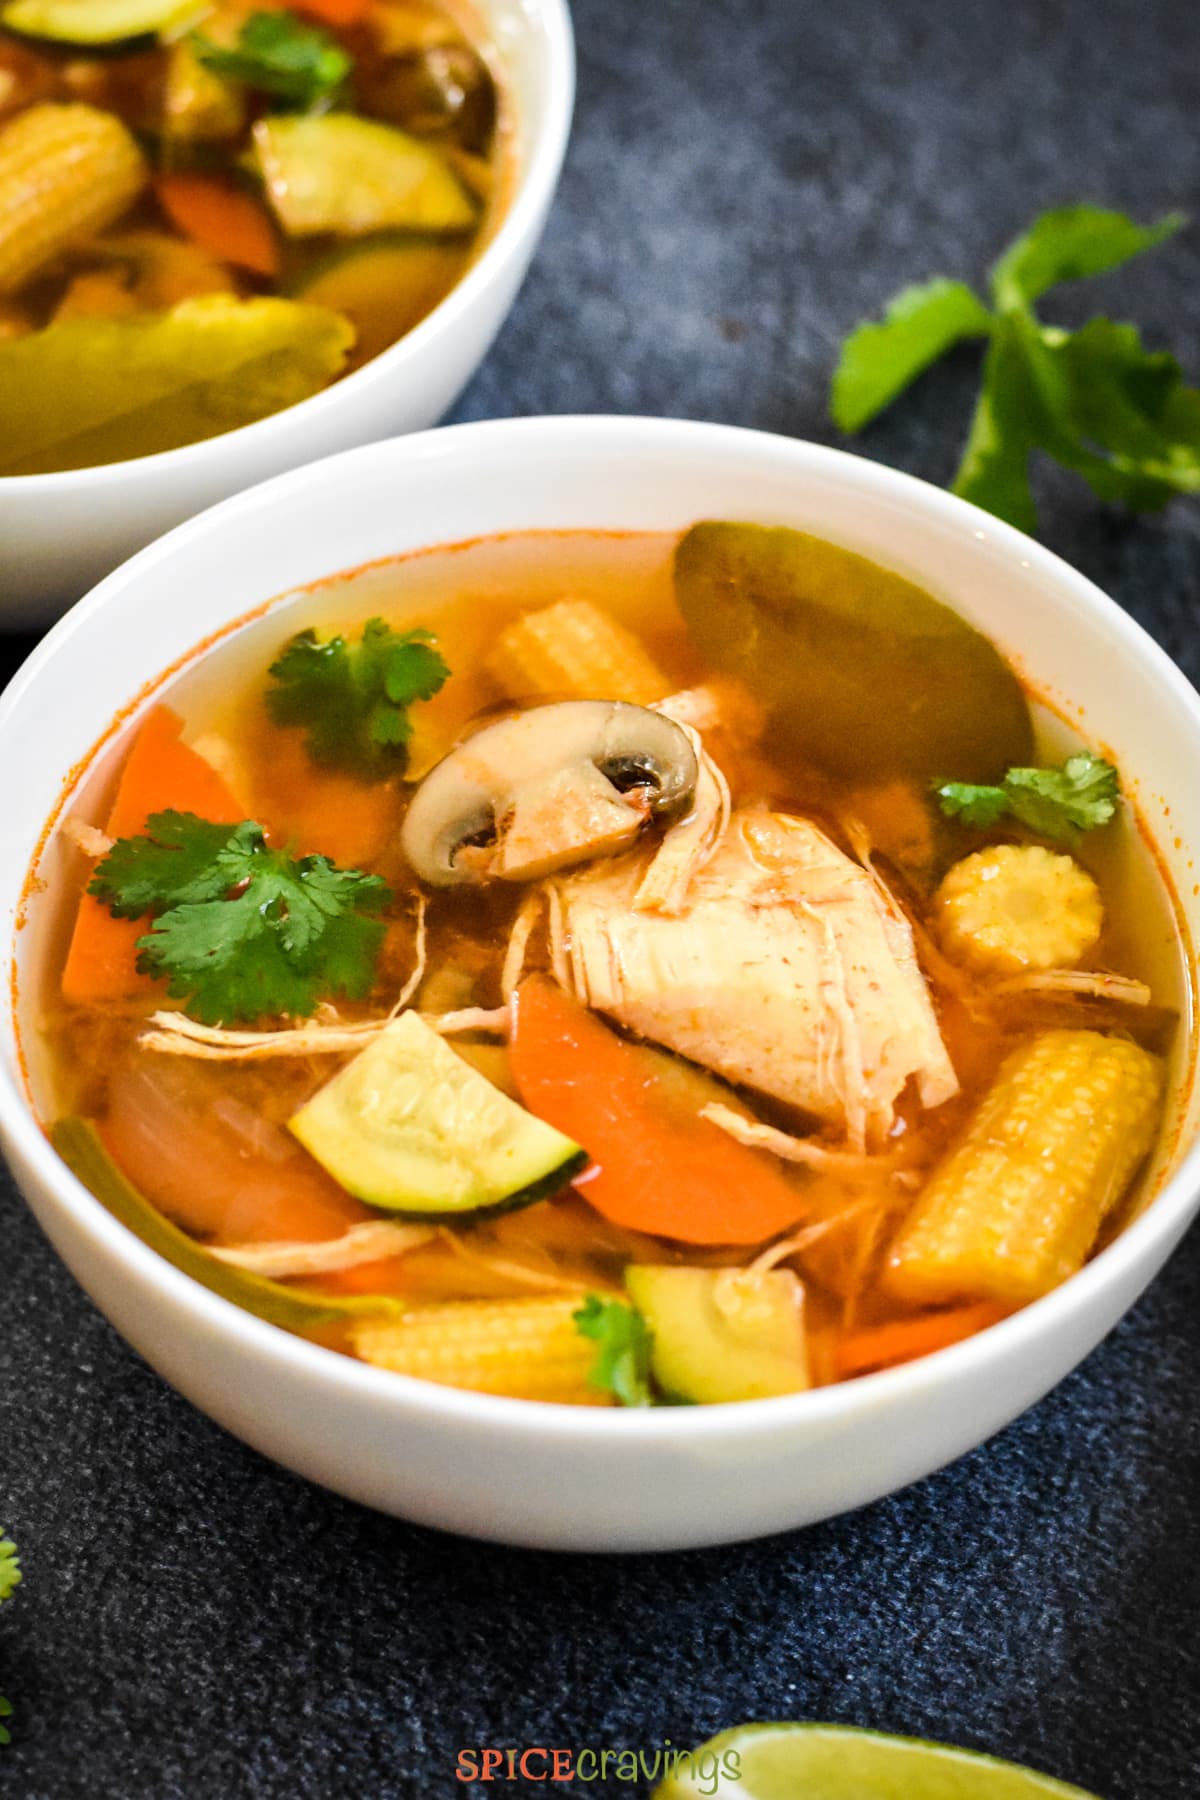 A bowl of tom yum soup with chicken, mushrooms and baby corn